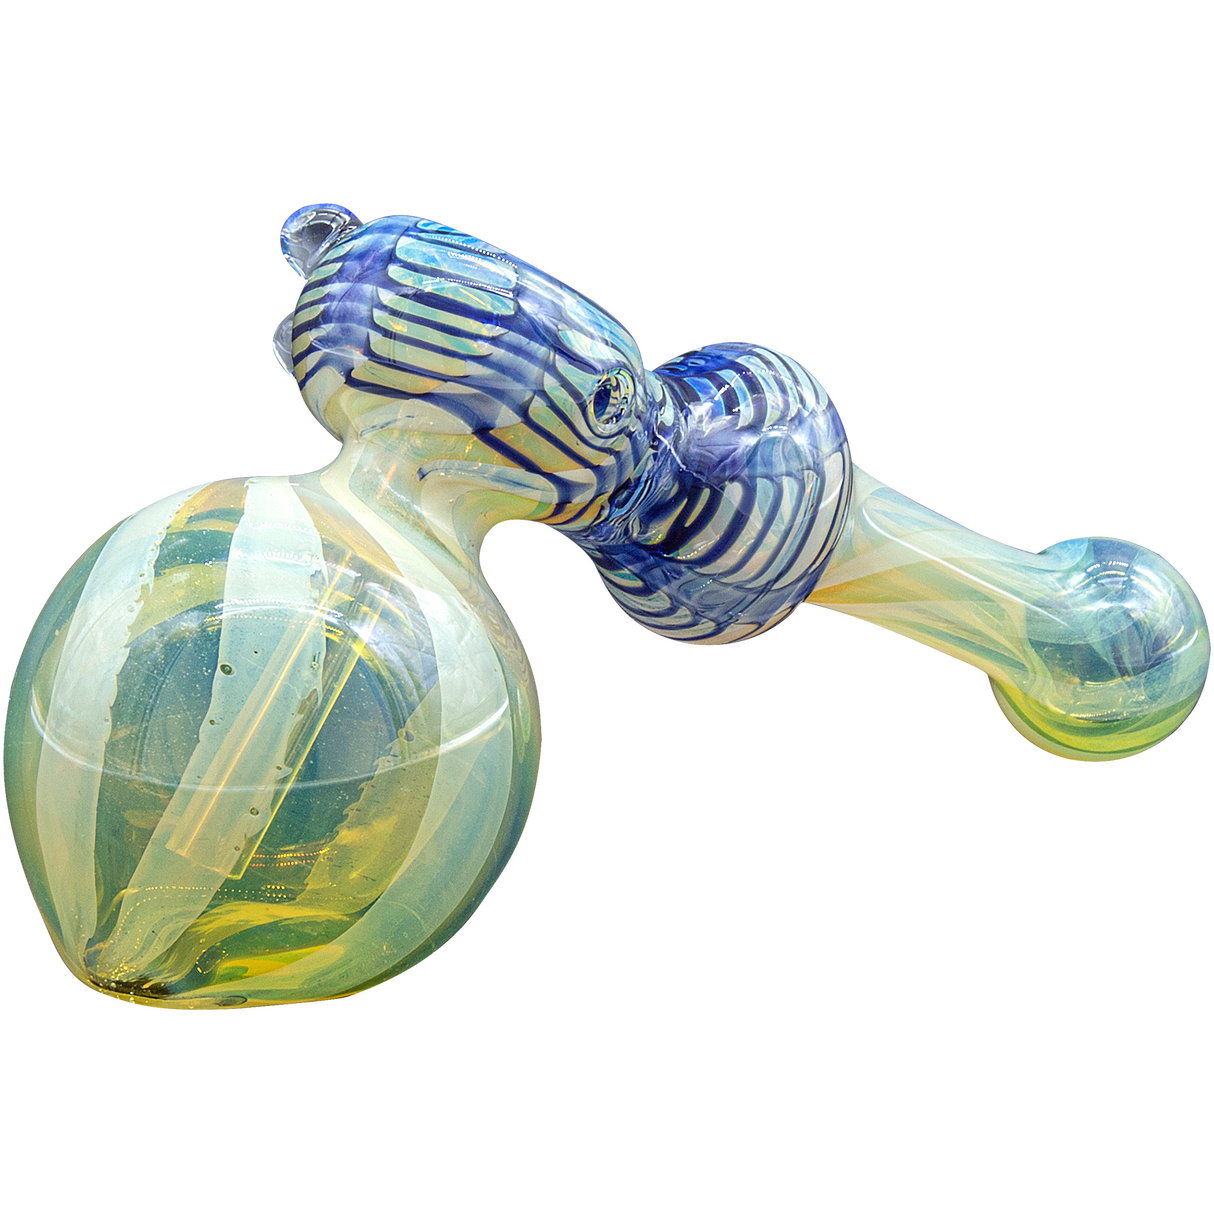 LA Pipes Raked Hammer Fumed Bubbler Pipe, 6" Borosilicate Glass, Side View